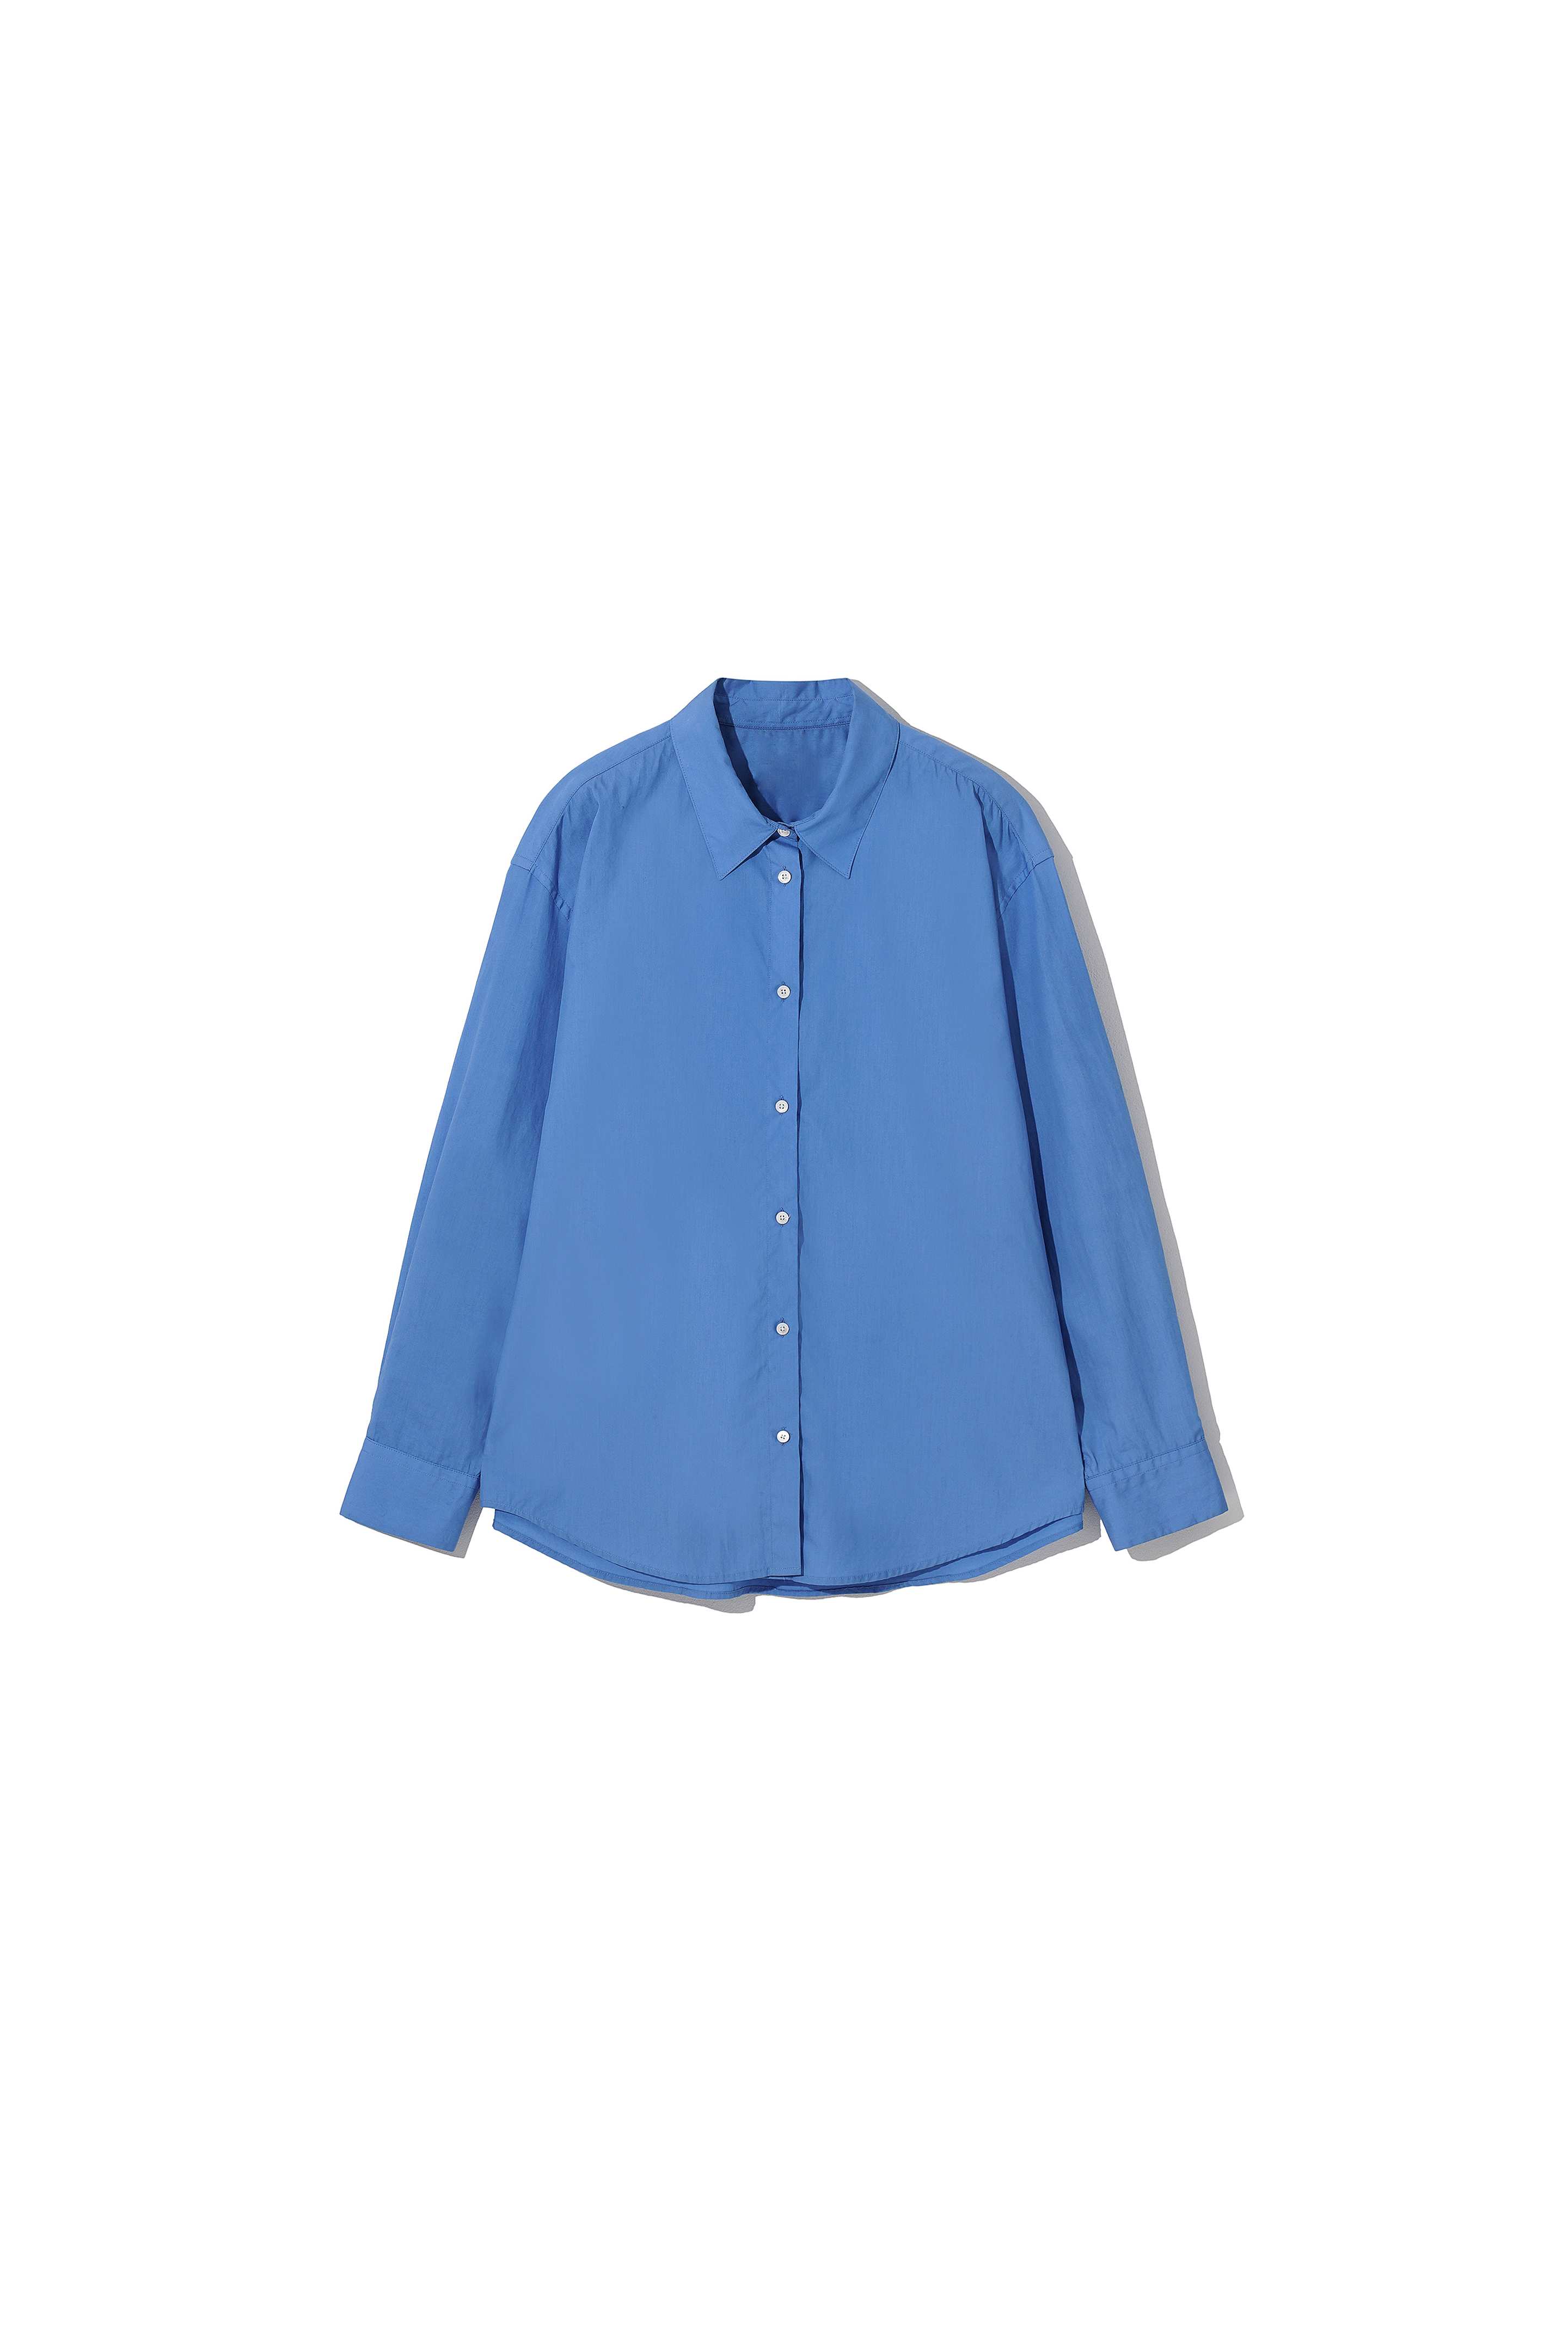 2nd) 60&#039; Cotton Shirts Over-sized Blue